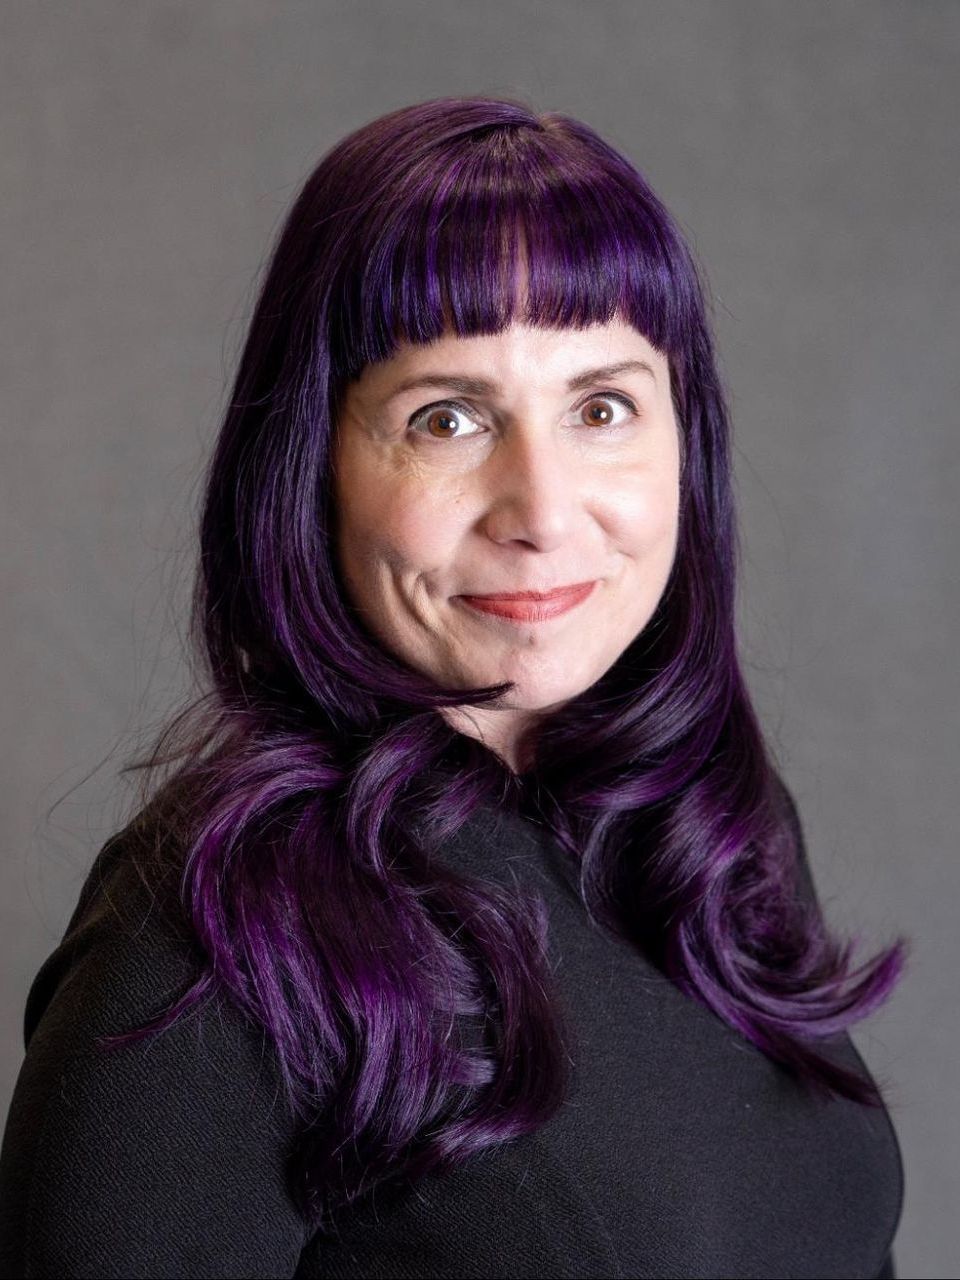 a woman with purple hair and a black shirt is smiling for the camera .